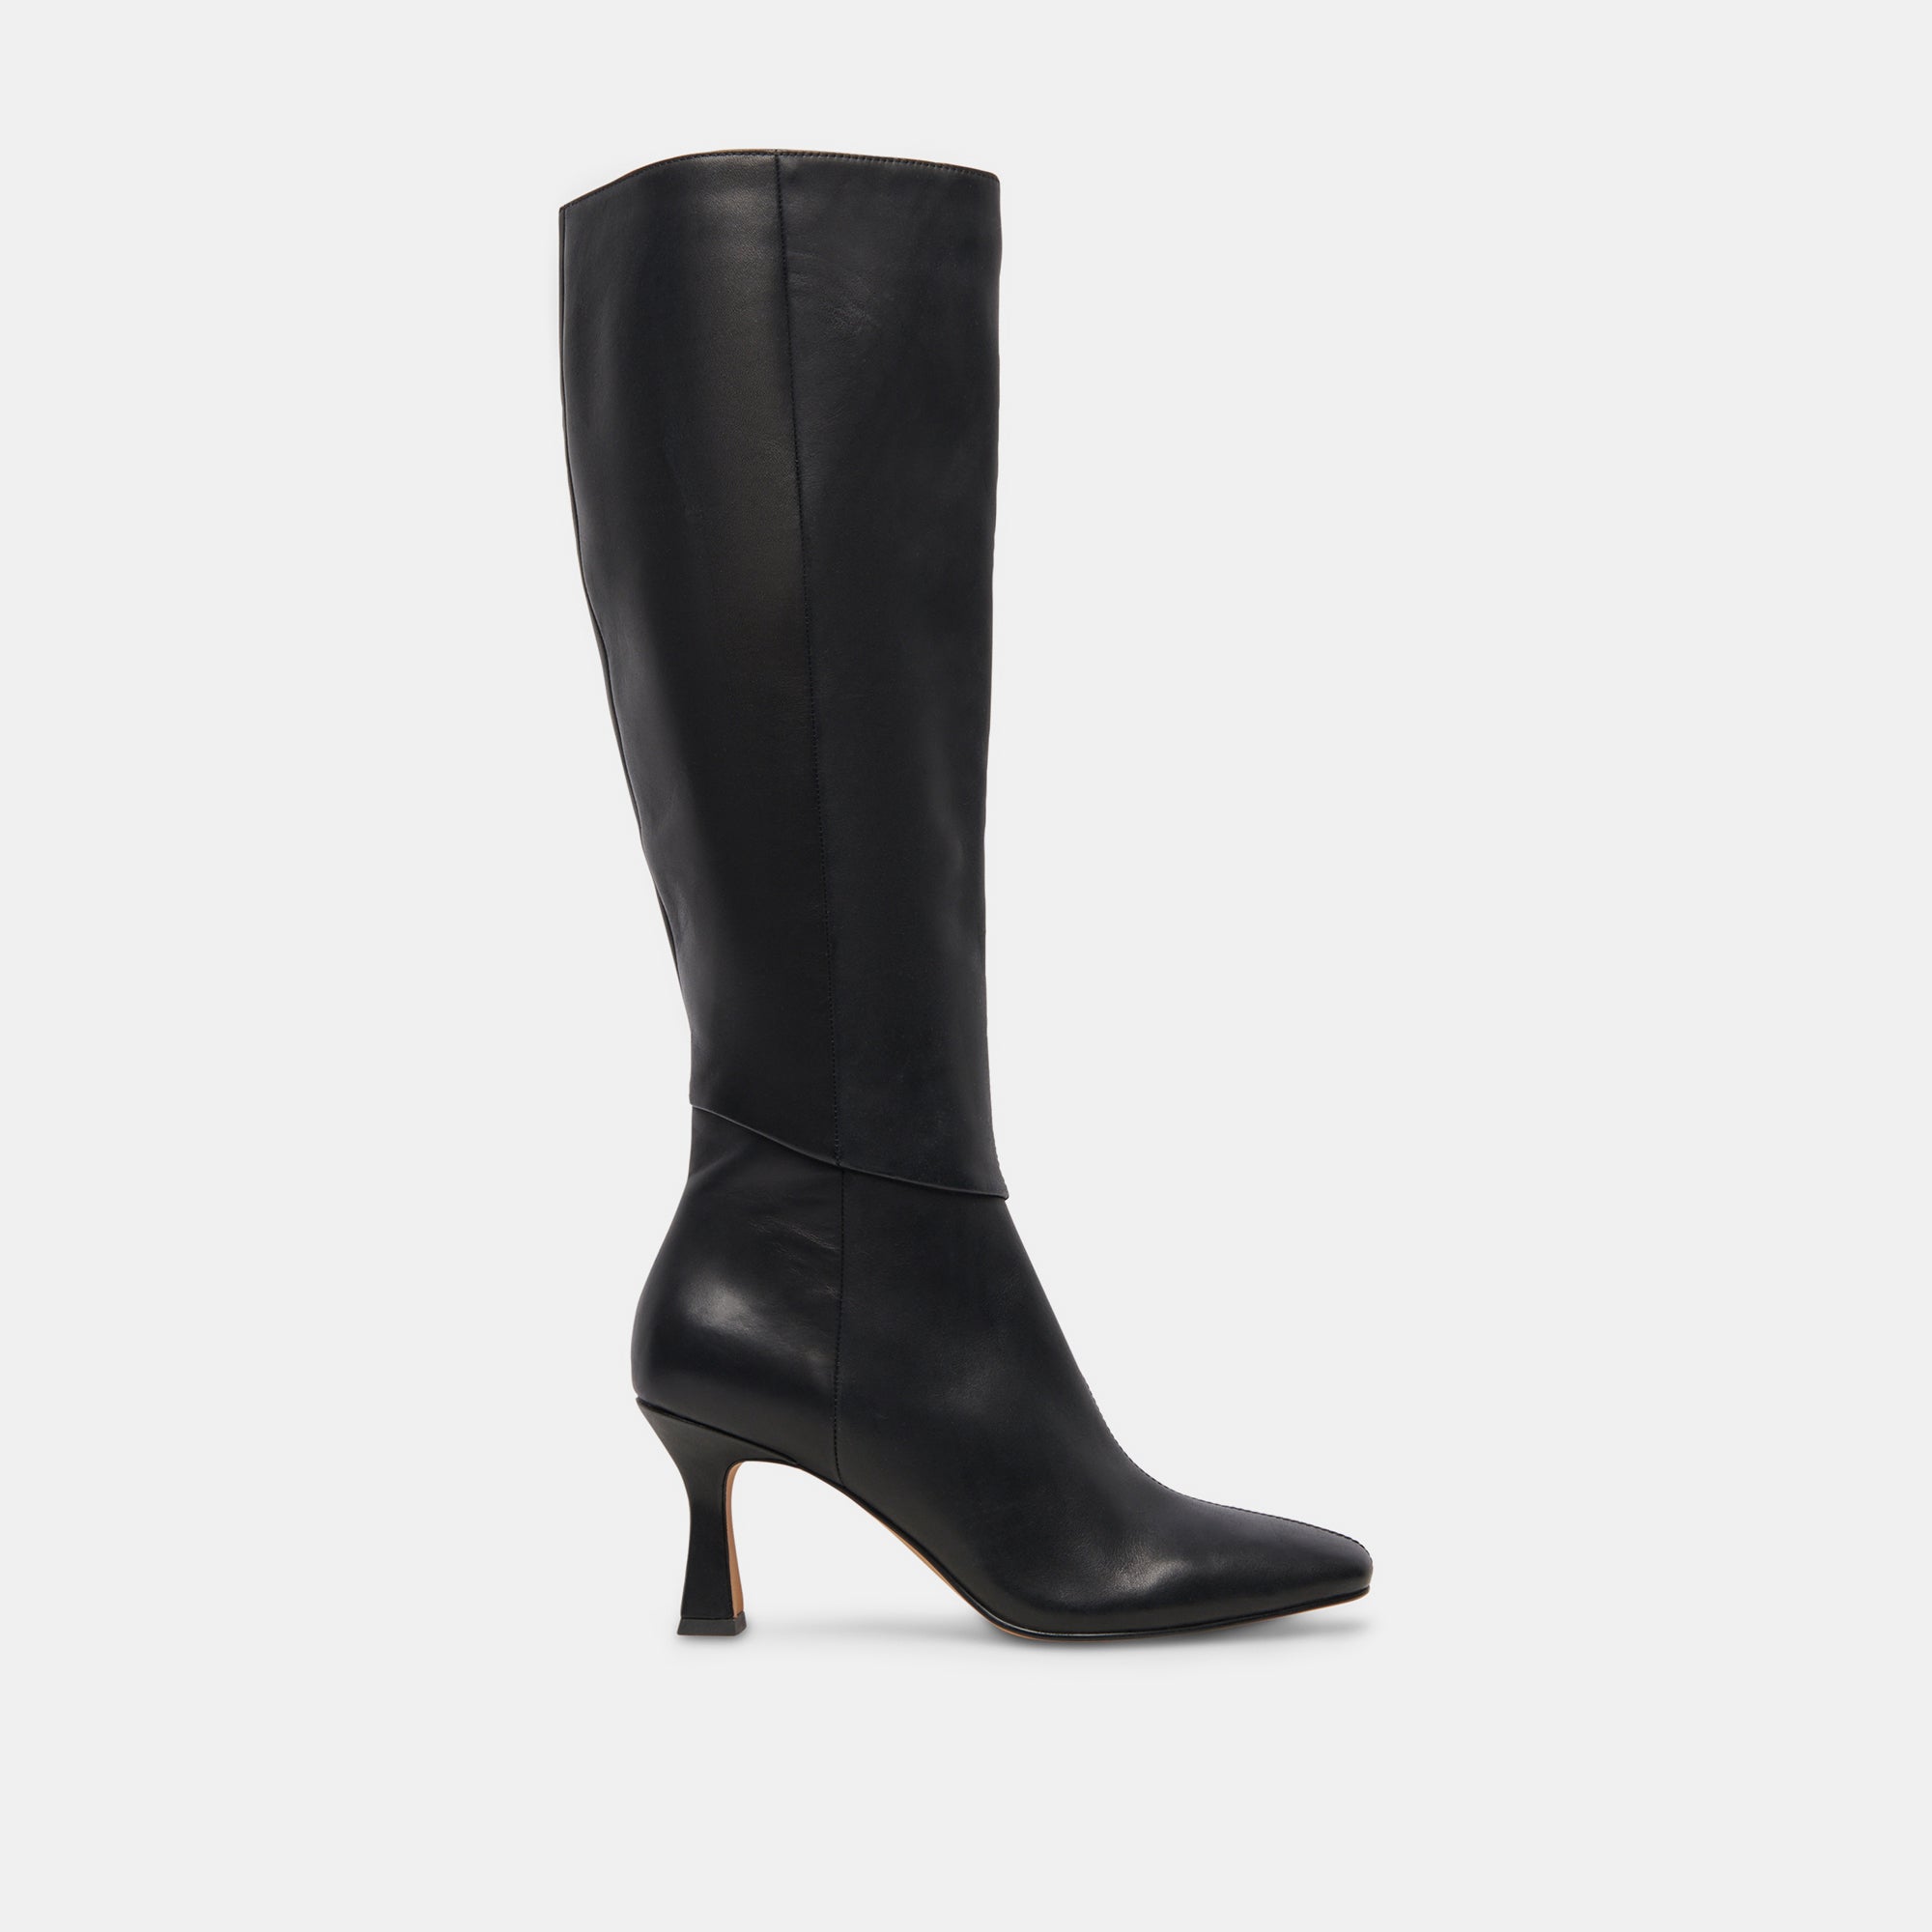 Knee High Boots | Over the Knee Boots for Women | Leather & Suede